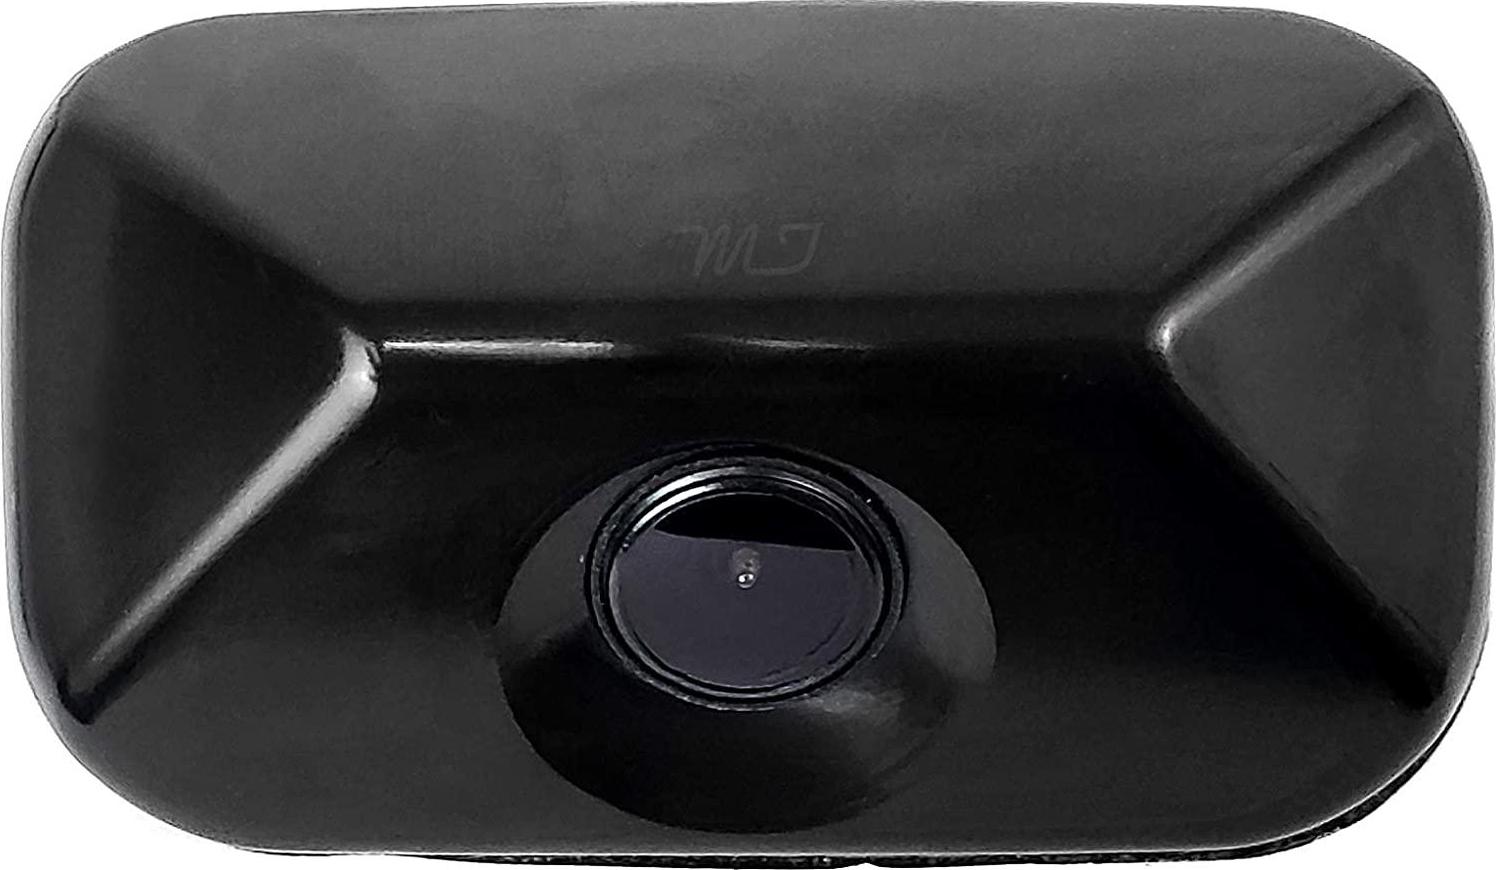 Master Tailgaters, Master Tailgaters Replacement for Kia Soul Backup Camera (2010-2013) OE Part # 95760-2K1013D